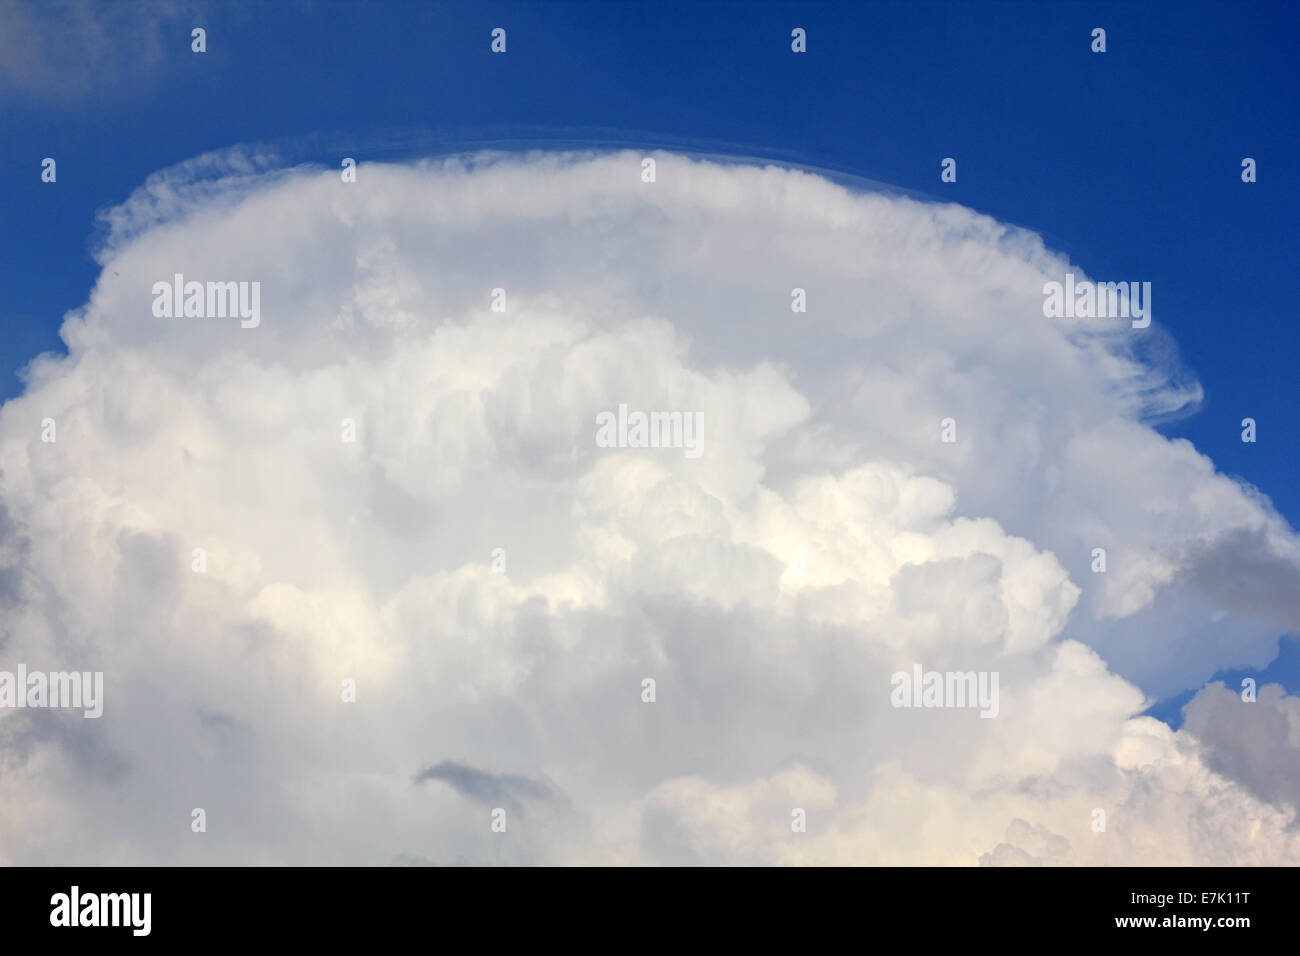 Bushy Park, SW London, England, UK. 19th September 2014. Unusual cloud formation in the sky over South West London. A large cumulus cloud is capped with a small wispy pileus cloud against a vivid blue sky. Credit:  Julia Gavin UK/Alamy Live News Stock Photo